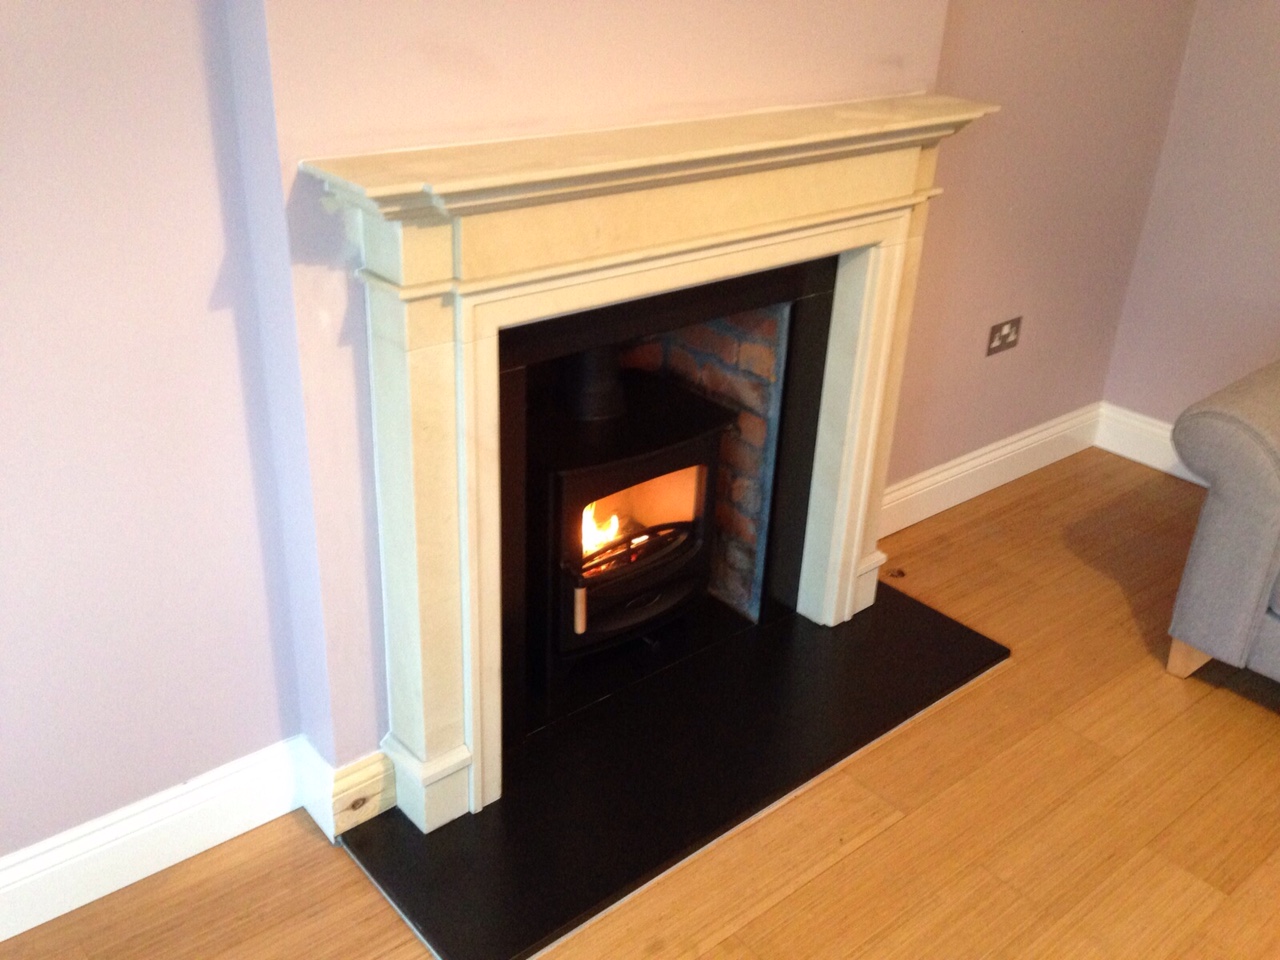 Embers Bristol stove installation and mantelpiece